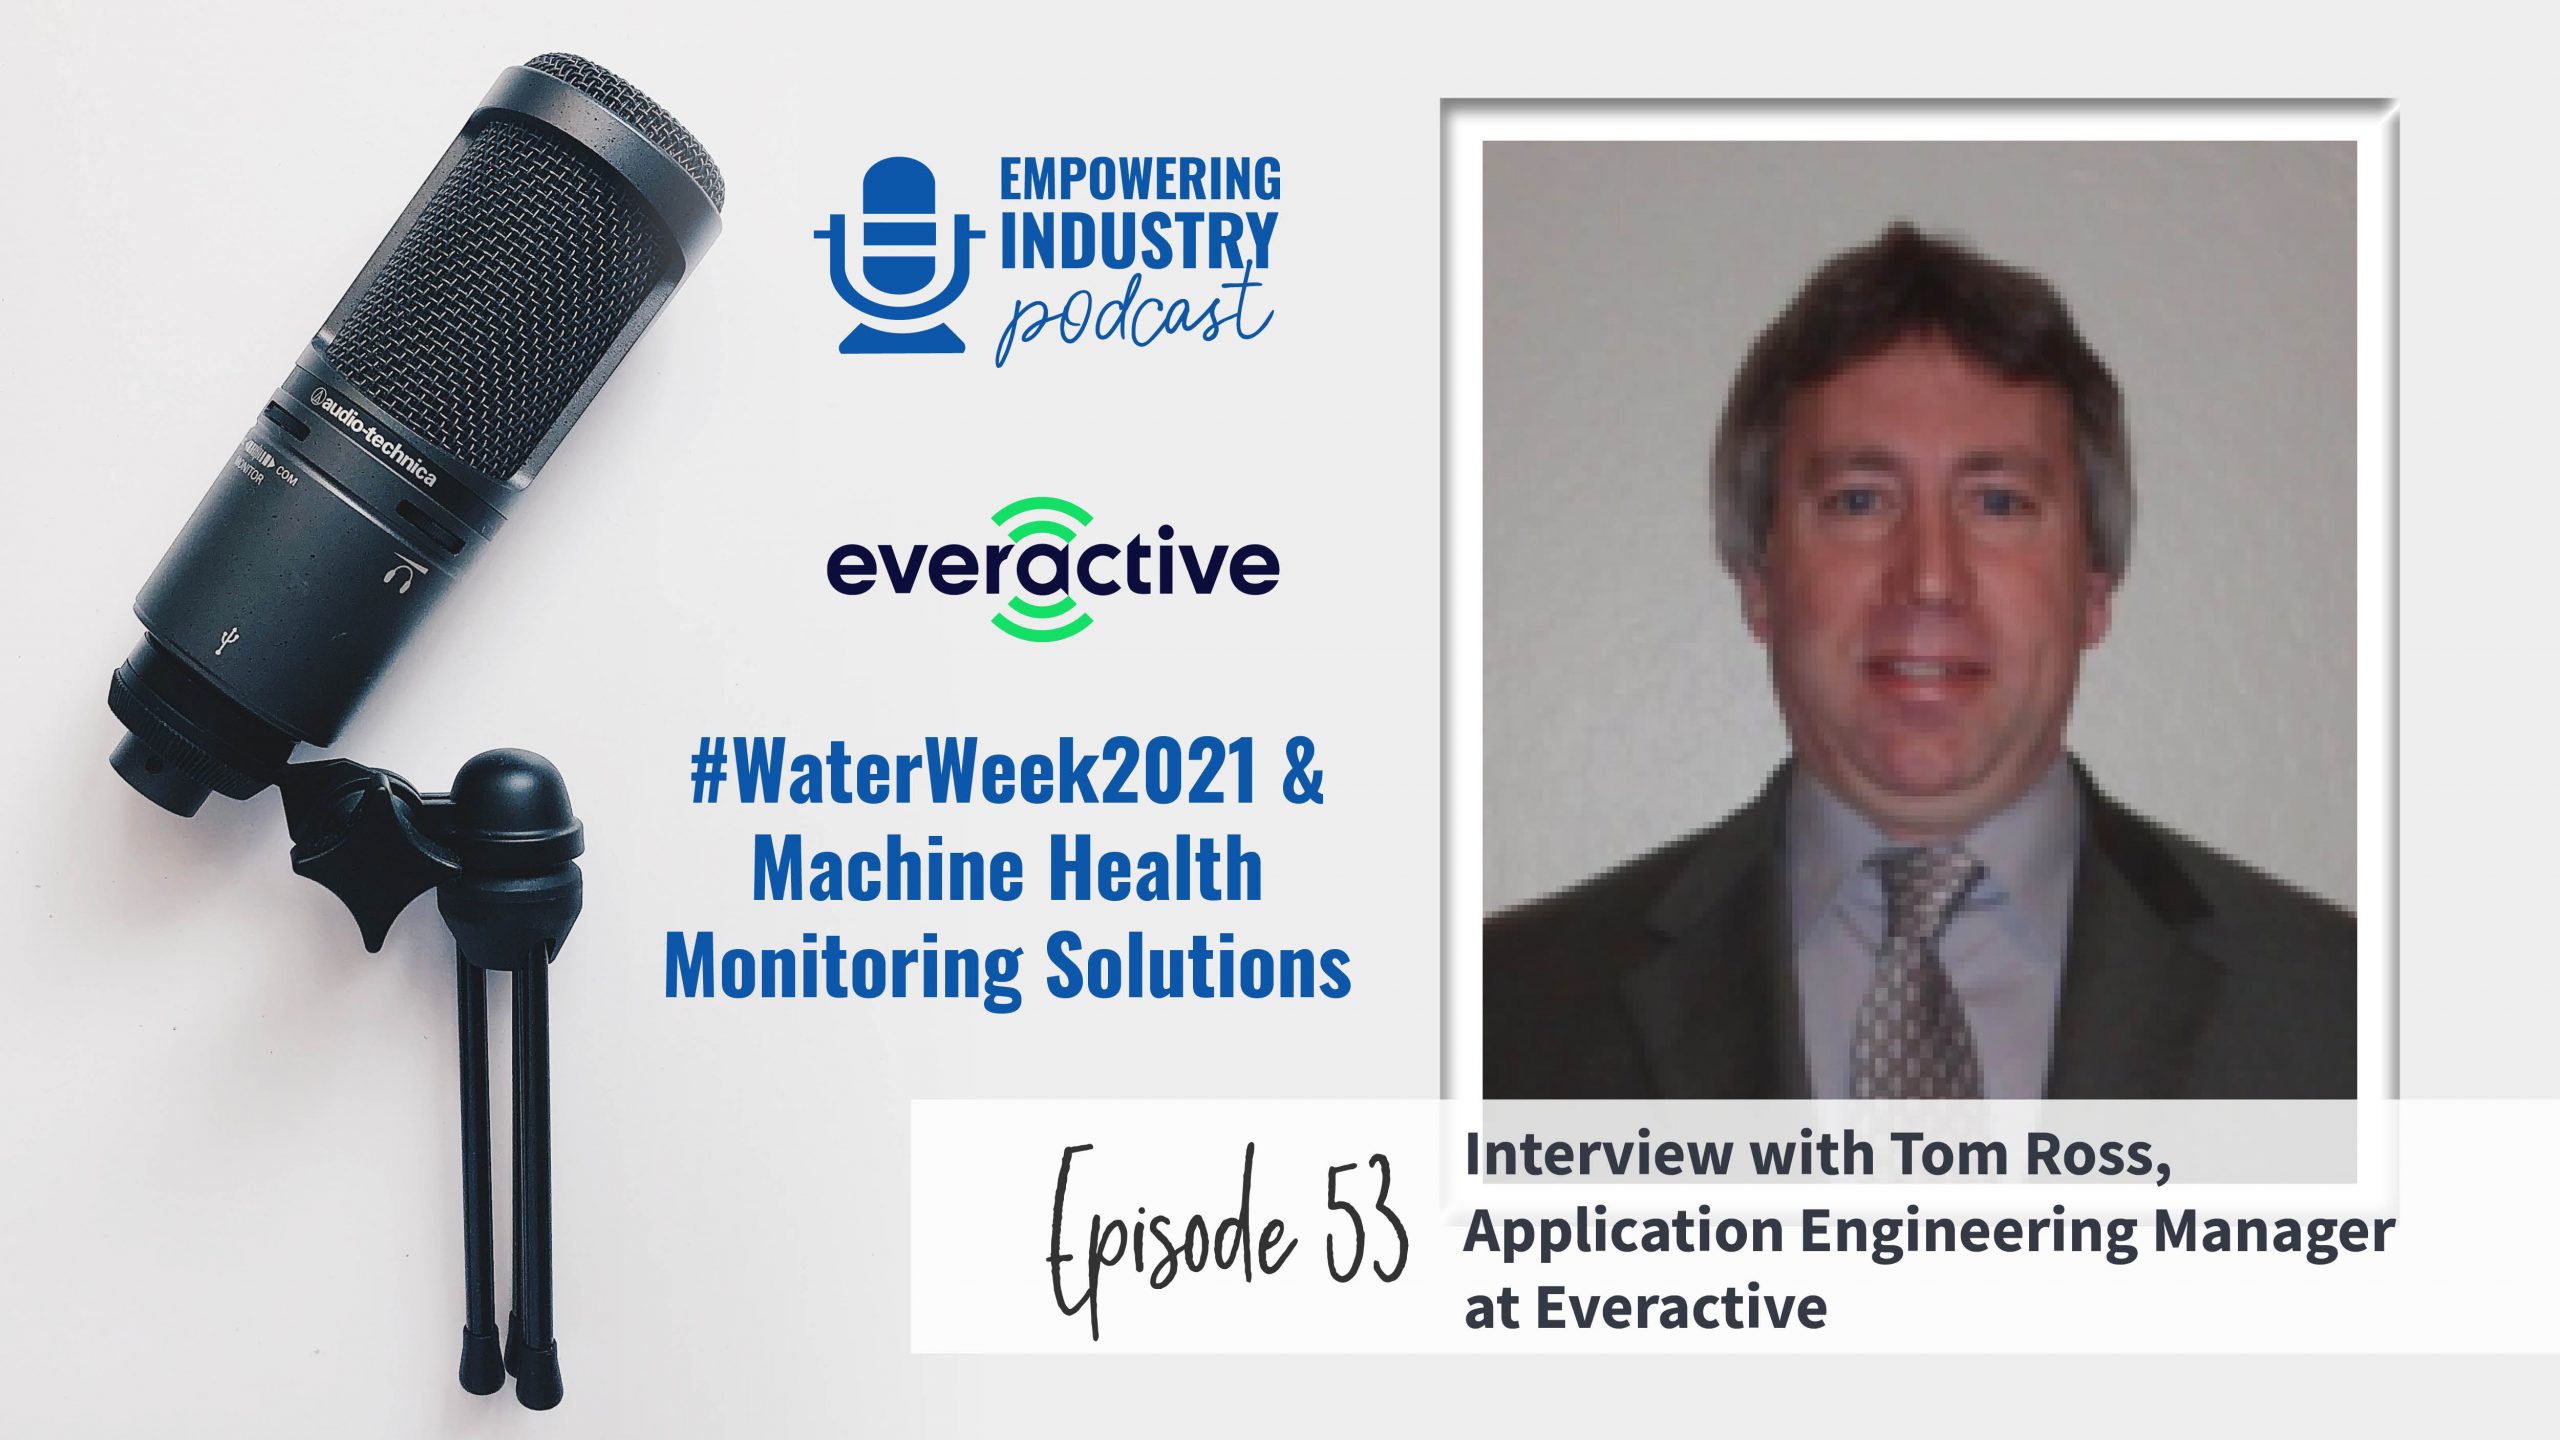 #WaterWeek2021 & Machine Health Monitoring Solutions with Tom Ross